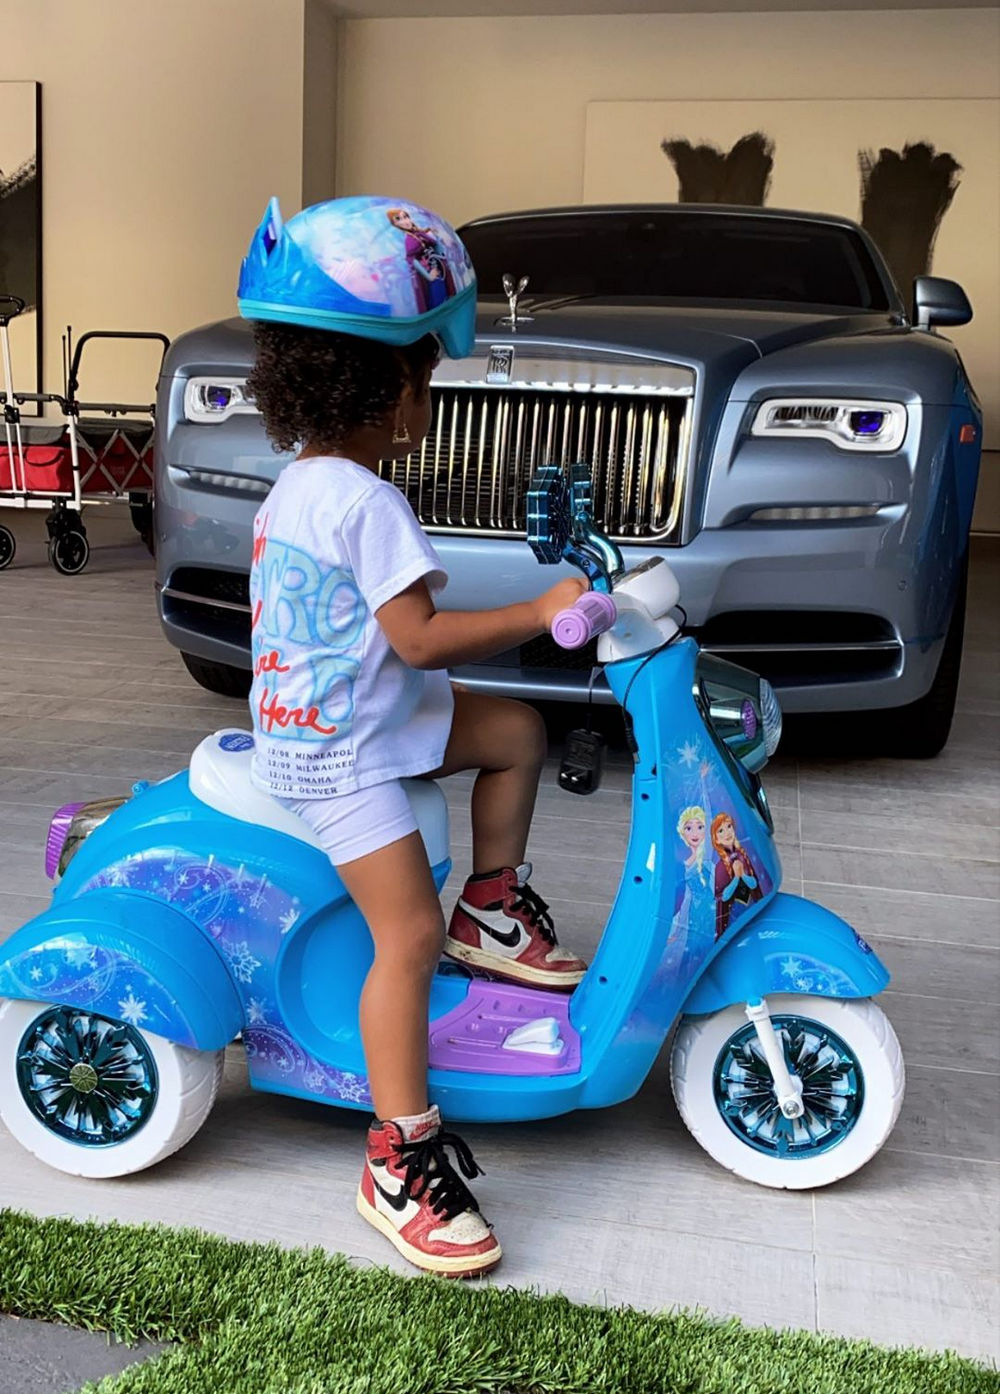 A look inside Kylie Jenner's $300k custom Rolls-Royce SUV that is so pink  it will remind you of Barbie's dream house - Luxurylaunches